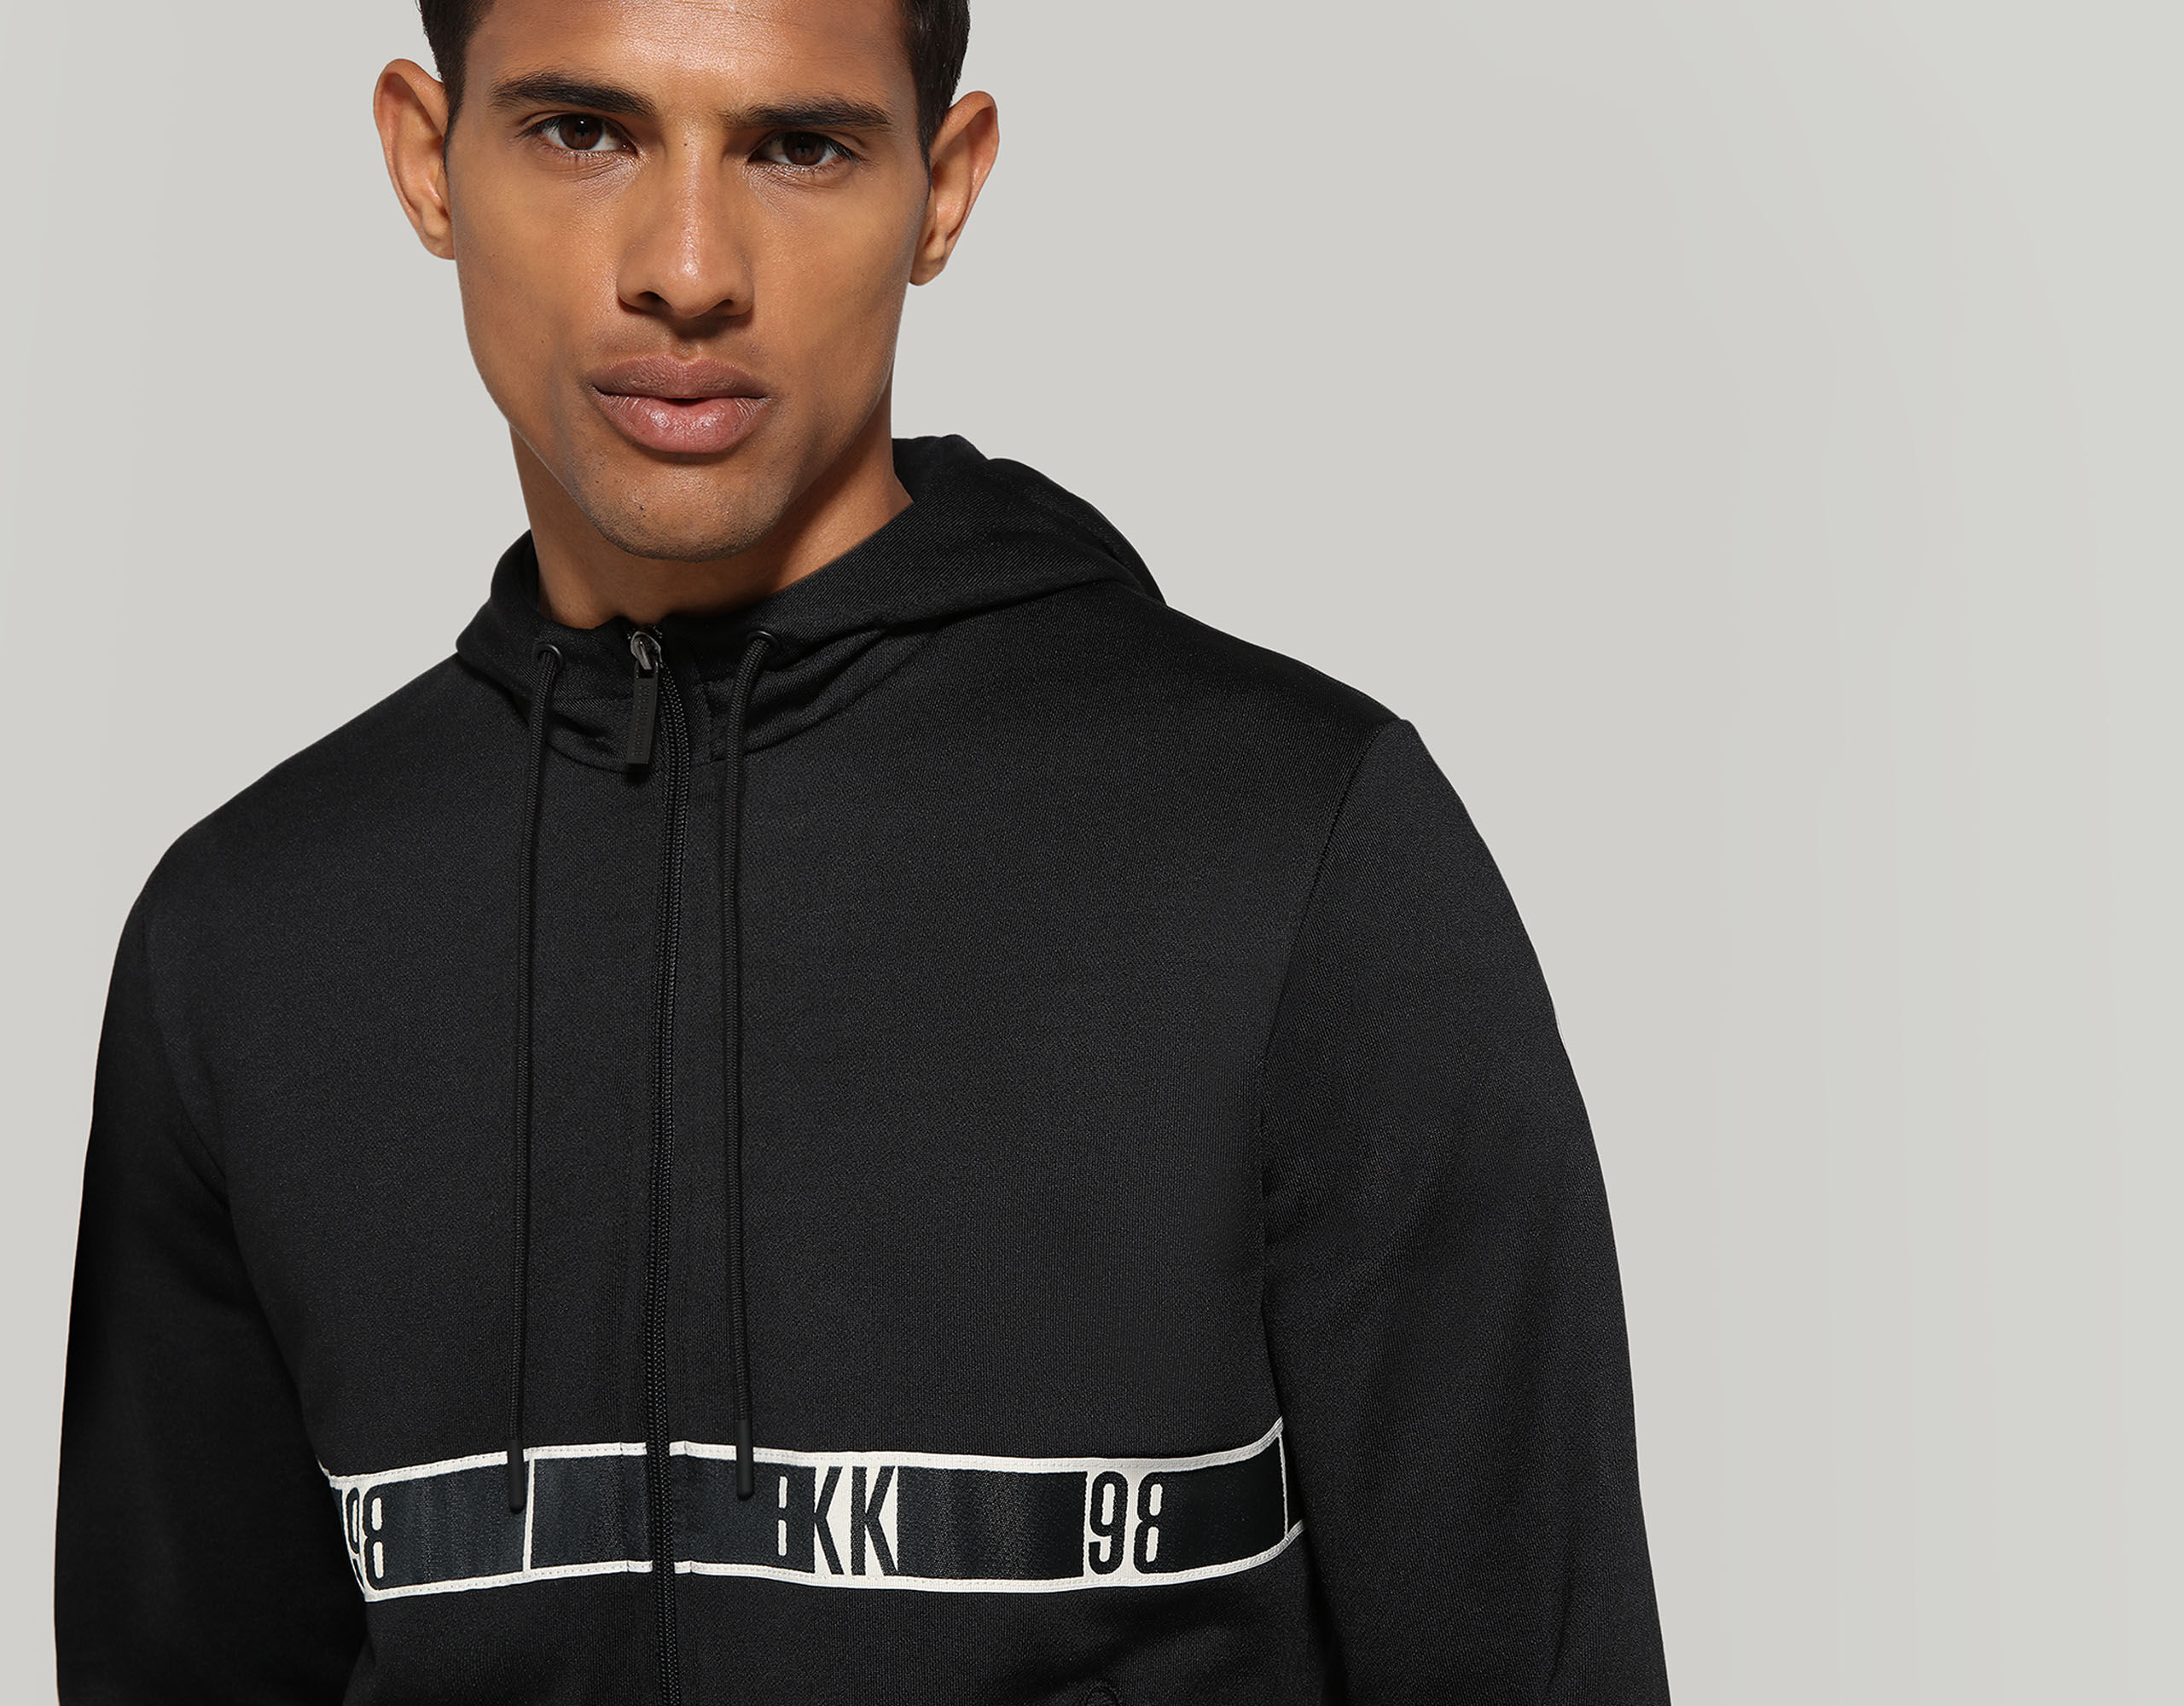 Clothing, shoes and accessories for men | Bikkembergs